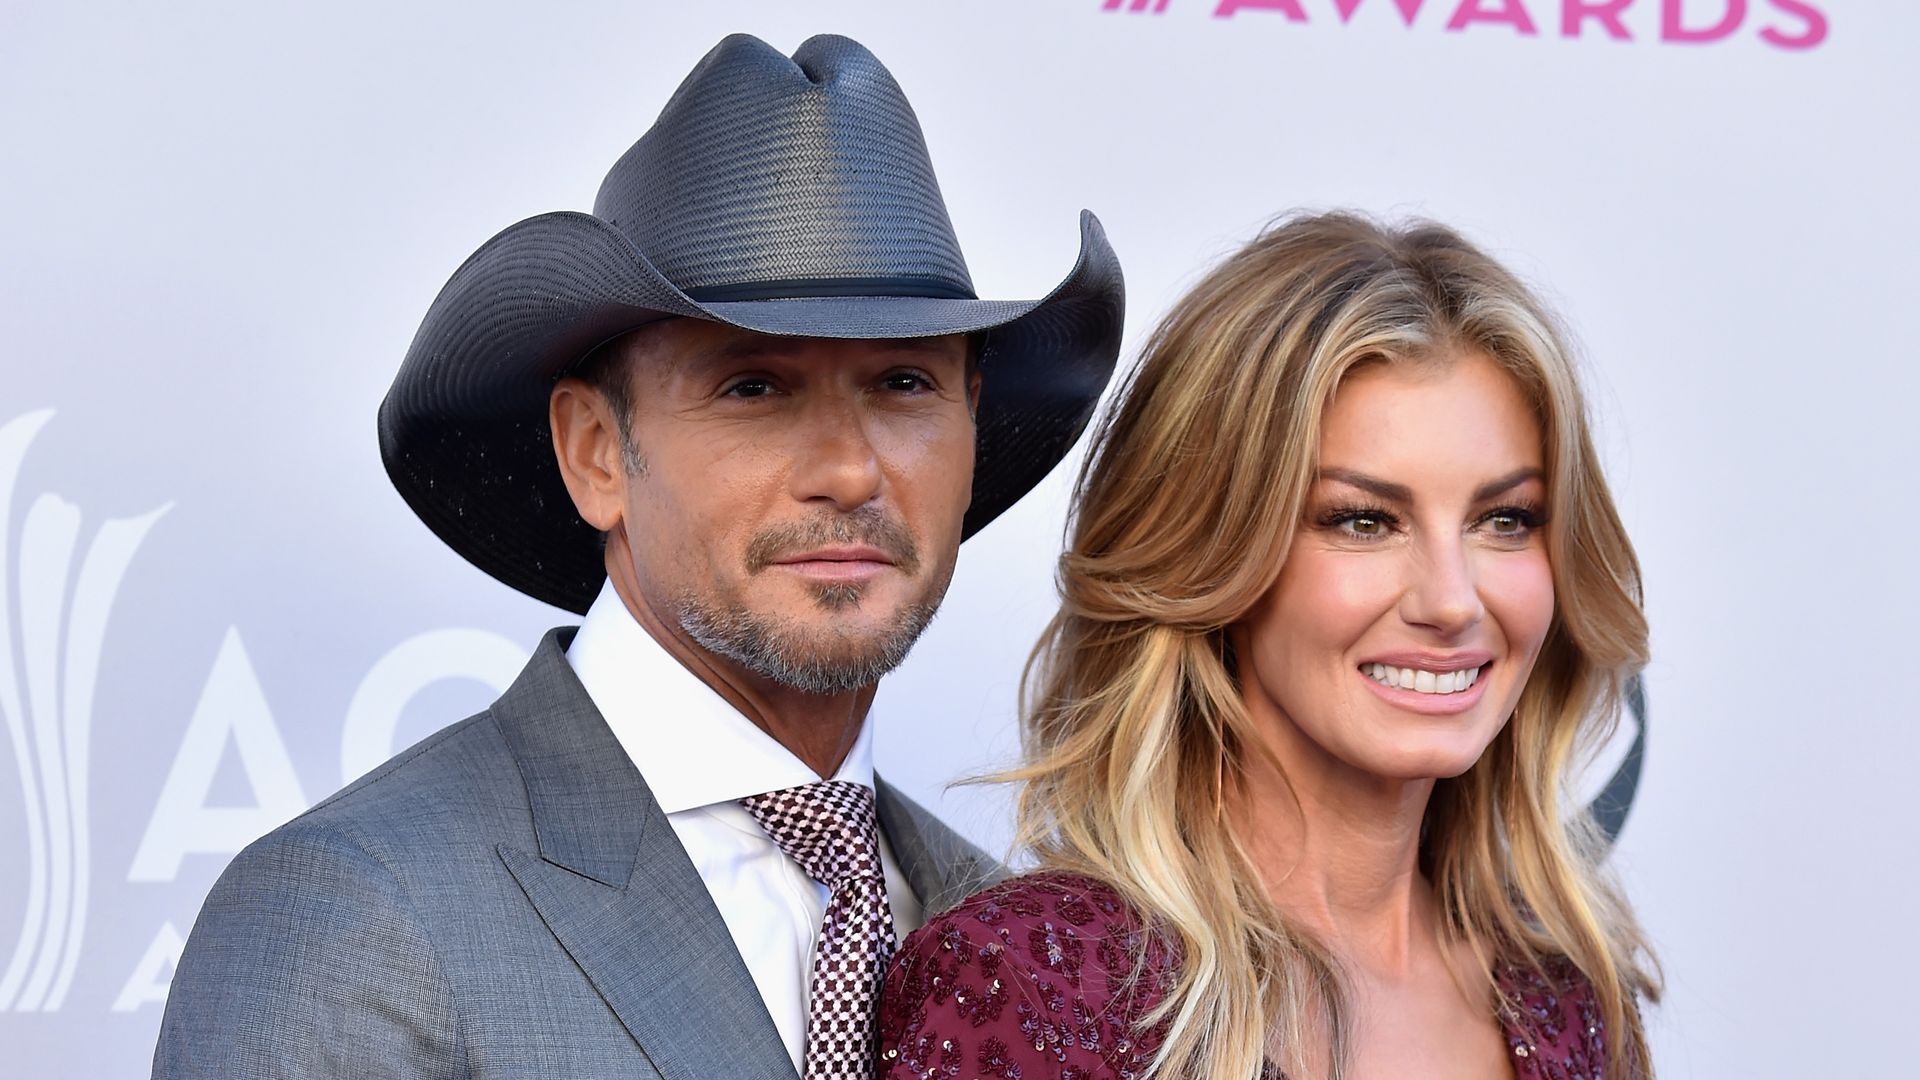 Tim McGraw and Faith Hill attend the 52nd Academy Of Country Music Awards on April 2, 2017 in Las Vegas, Nevada